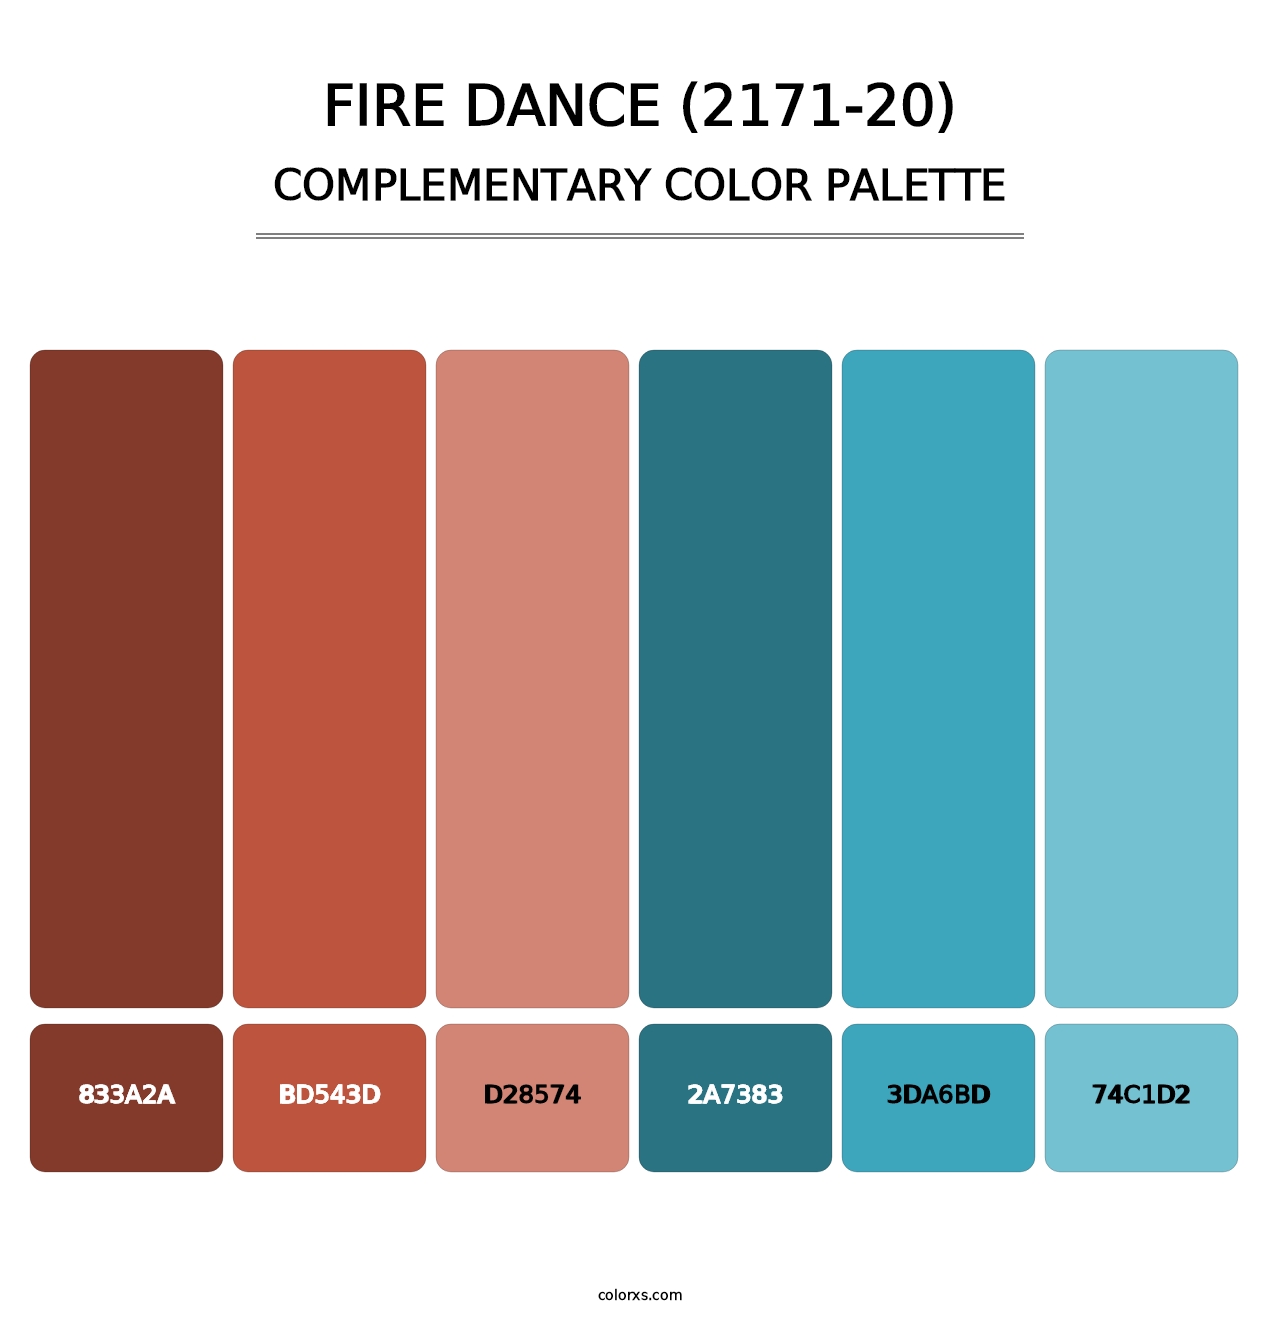 Fire Dance (2171-20) - Complementary Color Palette